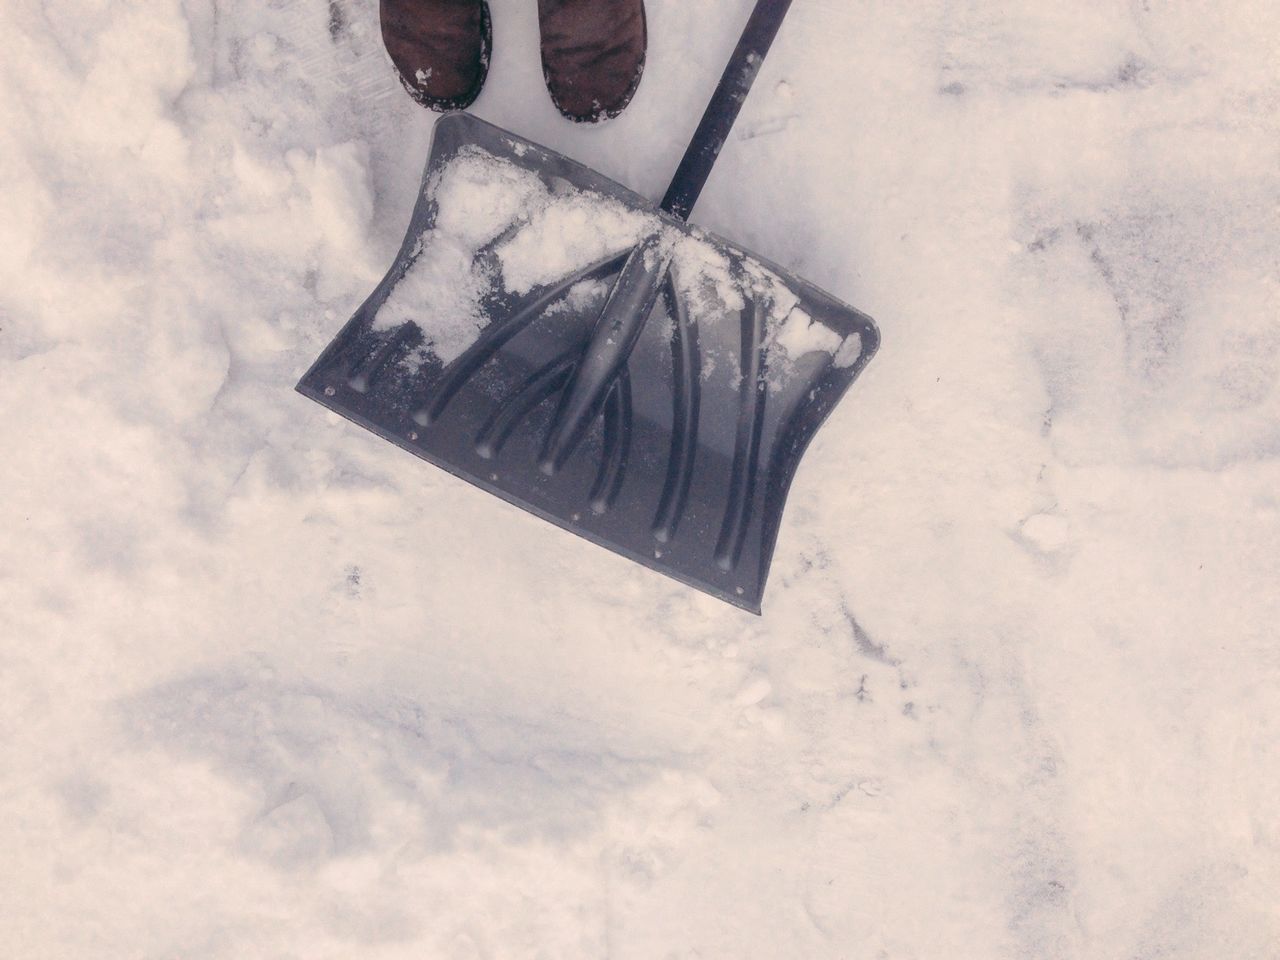 Man's feet with shovel in snow